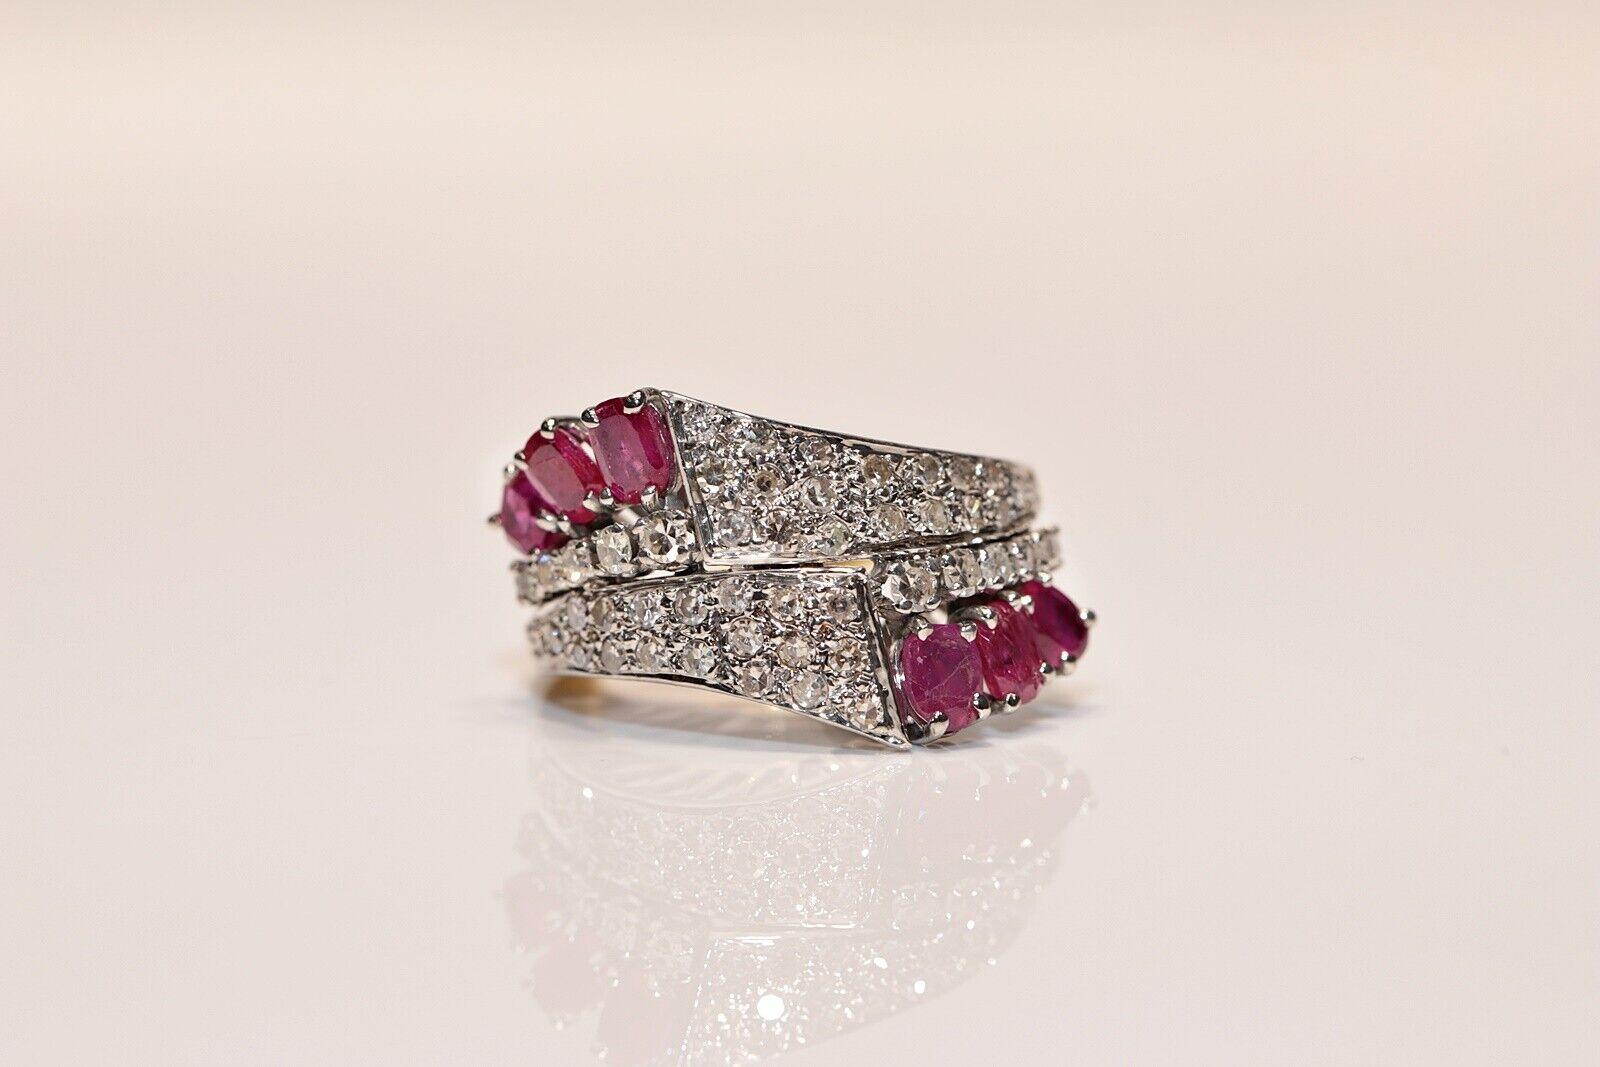 Retro Vintage Circa 1970s 14k Gold Natural Diamond And Ruby Decorated Ring For Sale